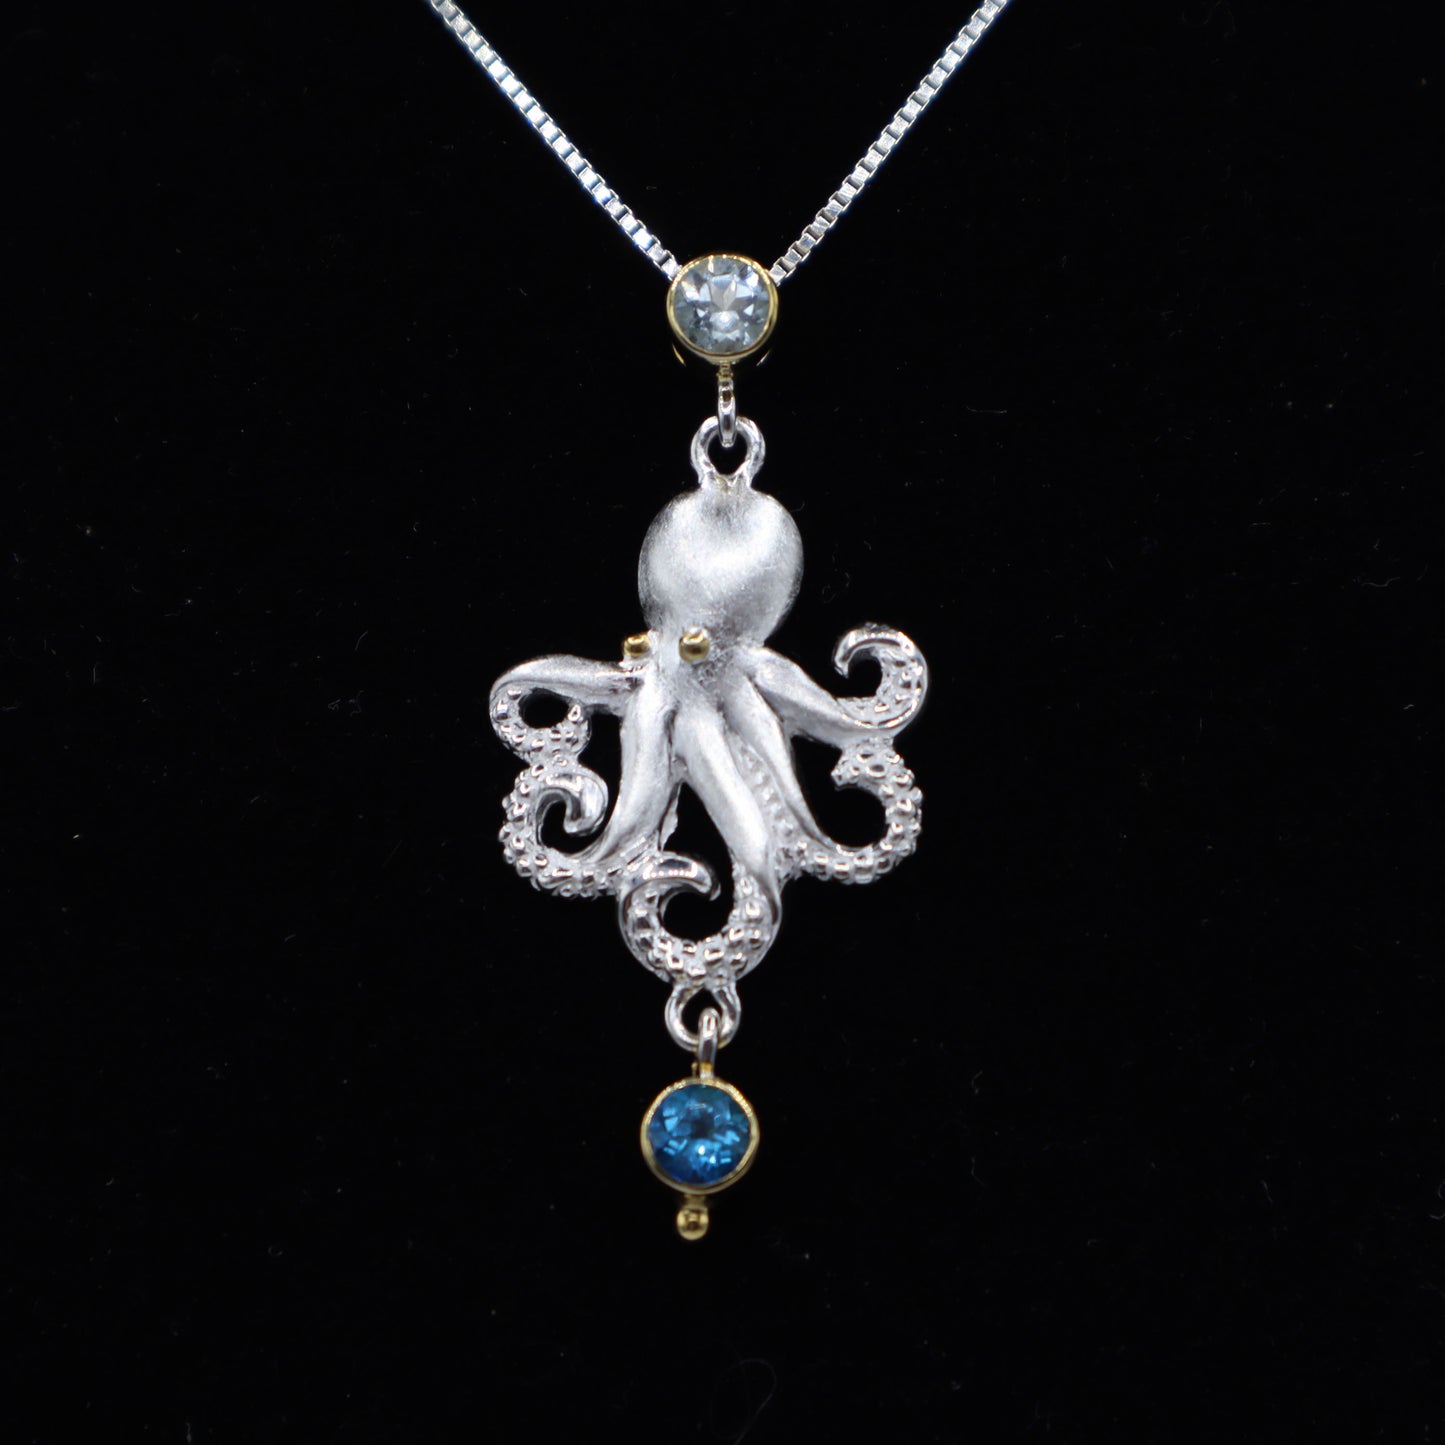 Silver Octopus Pendant with Blue Topaz